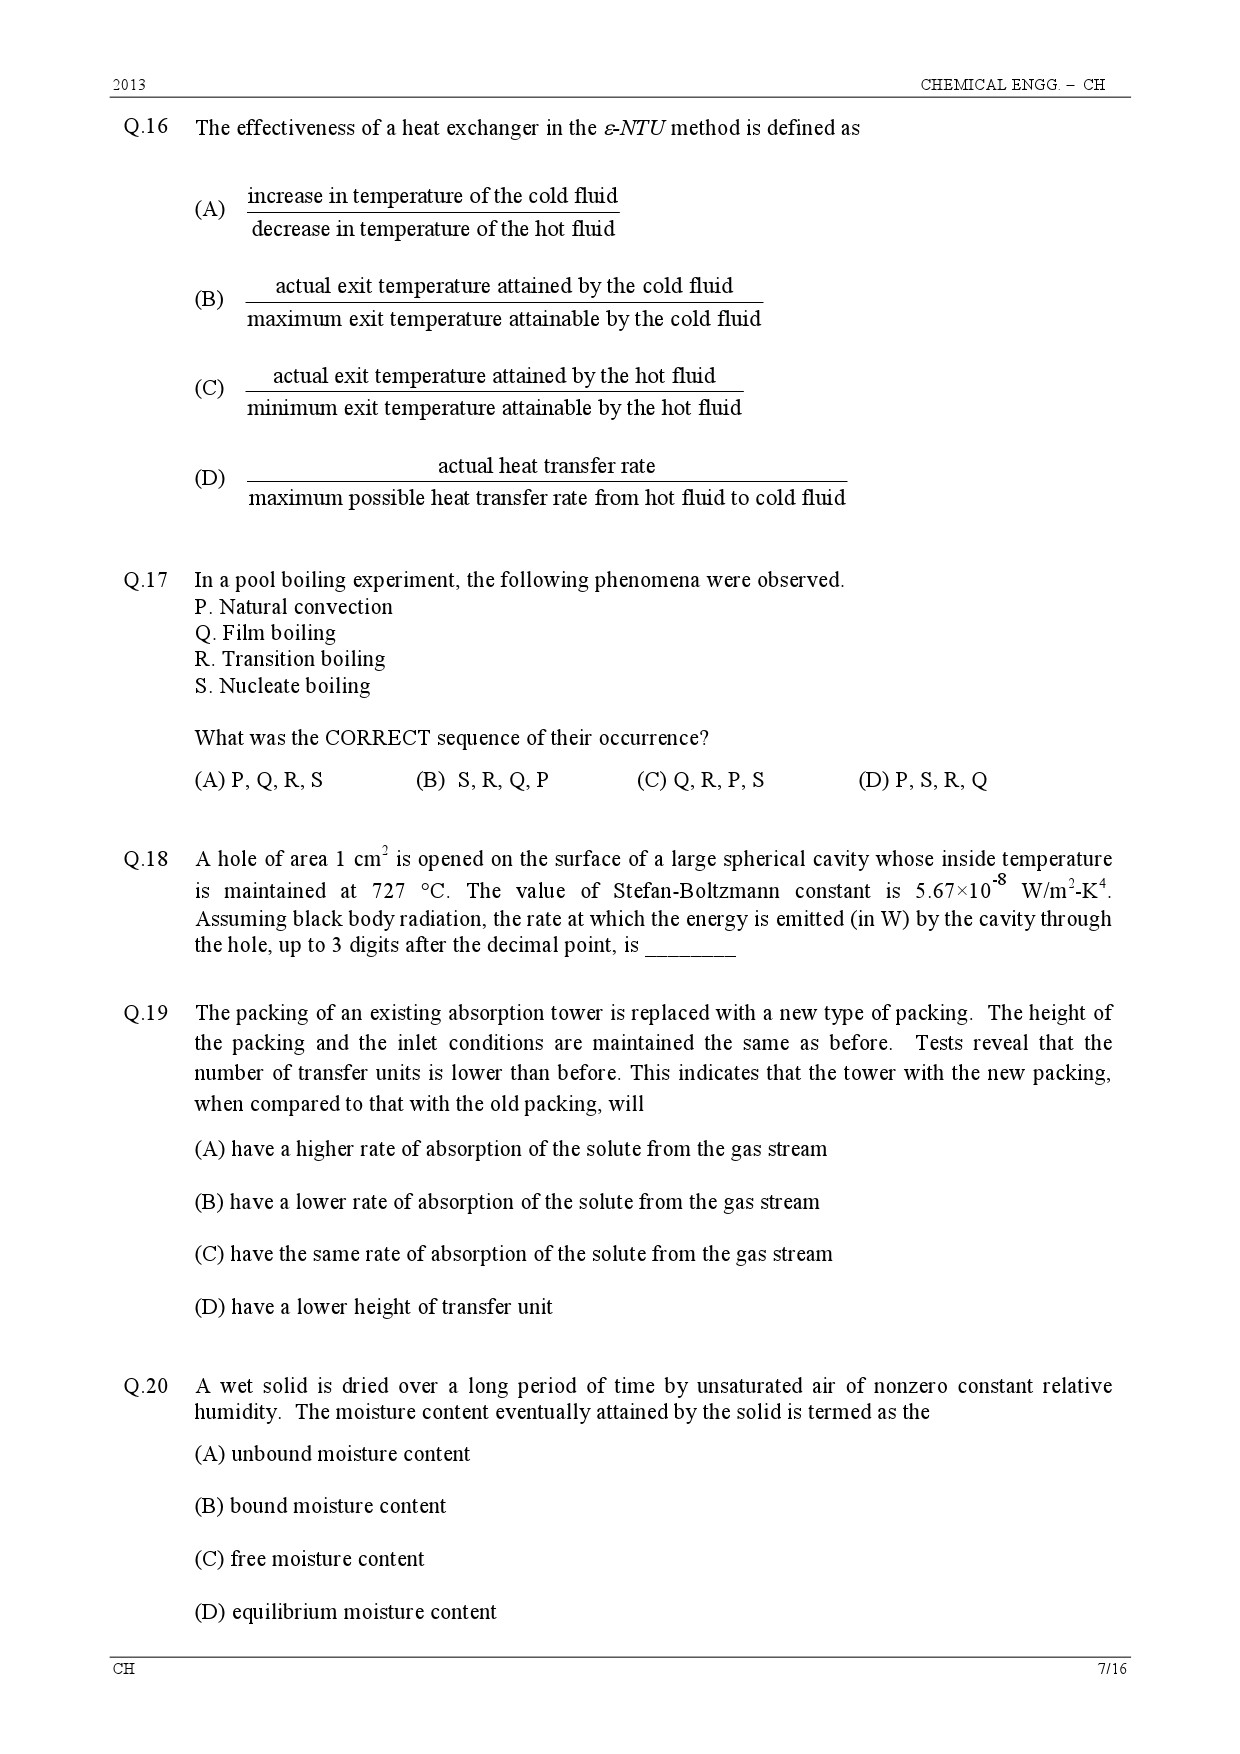 GATE Exam Question Paper 2013 Chemical Engineering 7